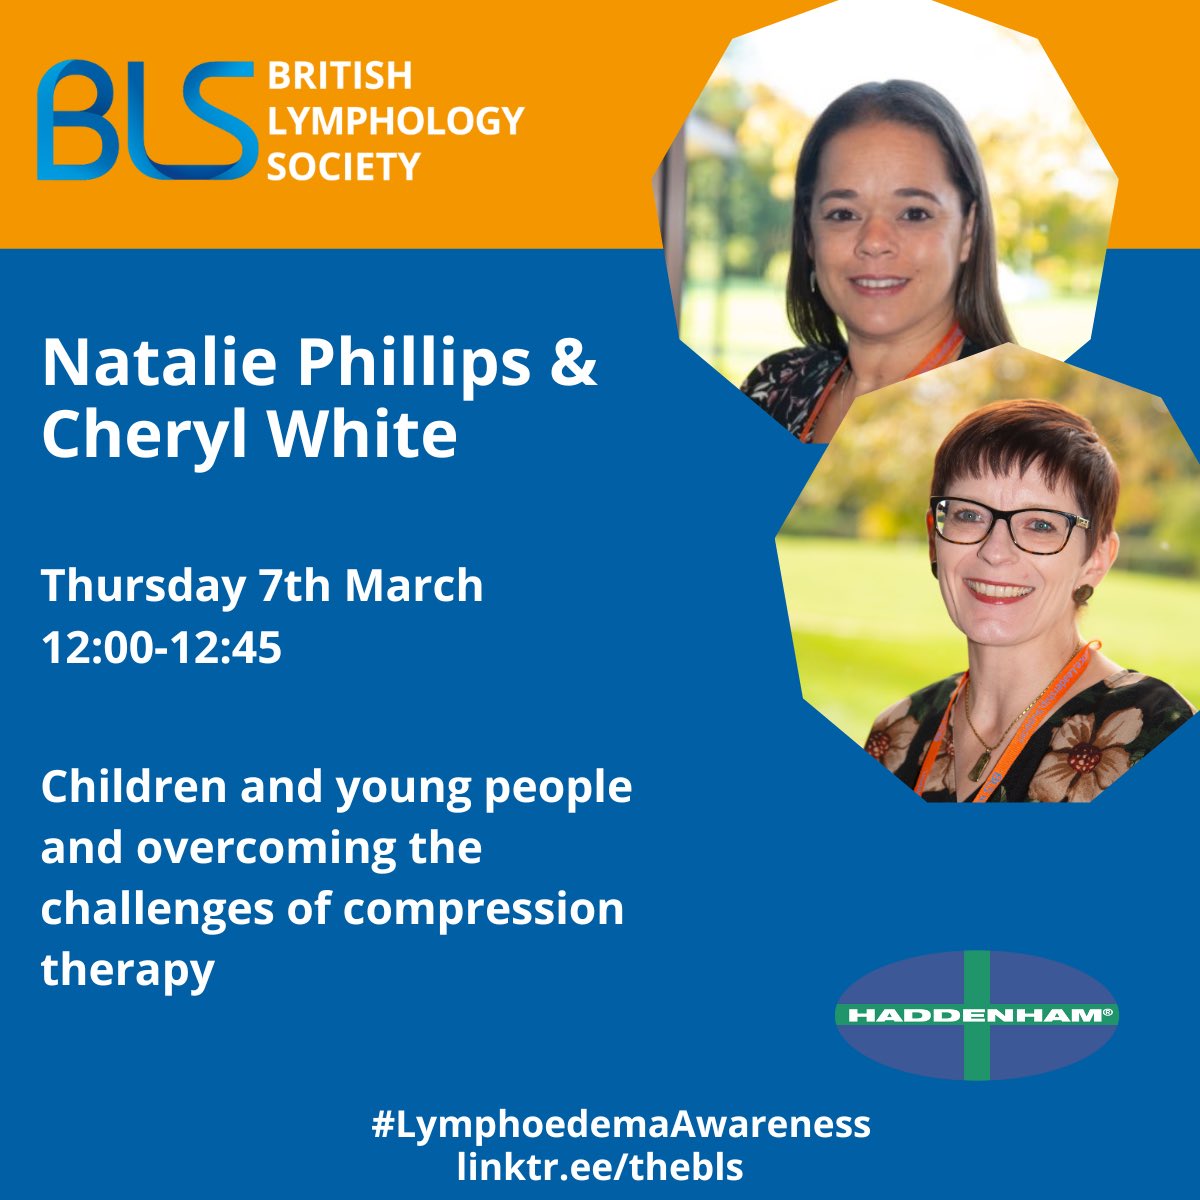 Lymphoedema Awareness week is coming up we are excited to announce that Natalie Phillips will be discussing children & young people's challenges in overcoming compression therapy. Thursday 7th March 12:00 - 12:45 Free Registration 🔗 app.livestorm.co/the-bls